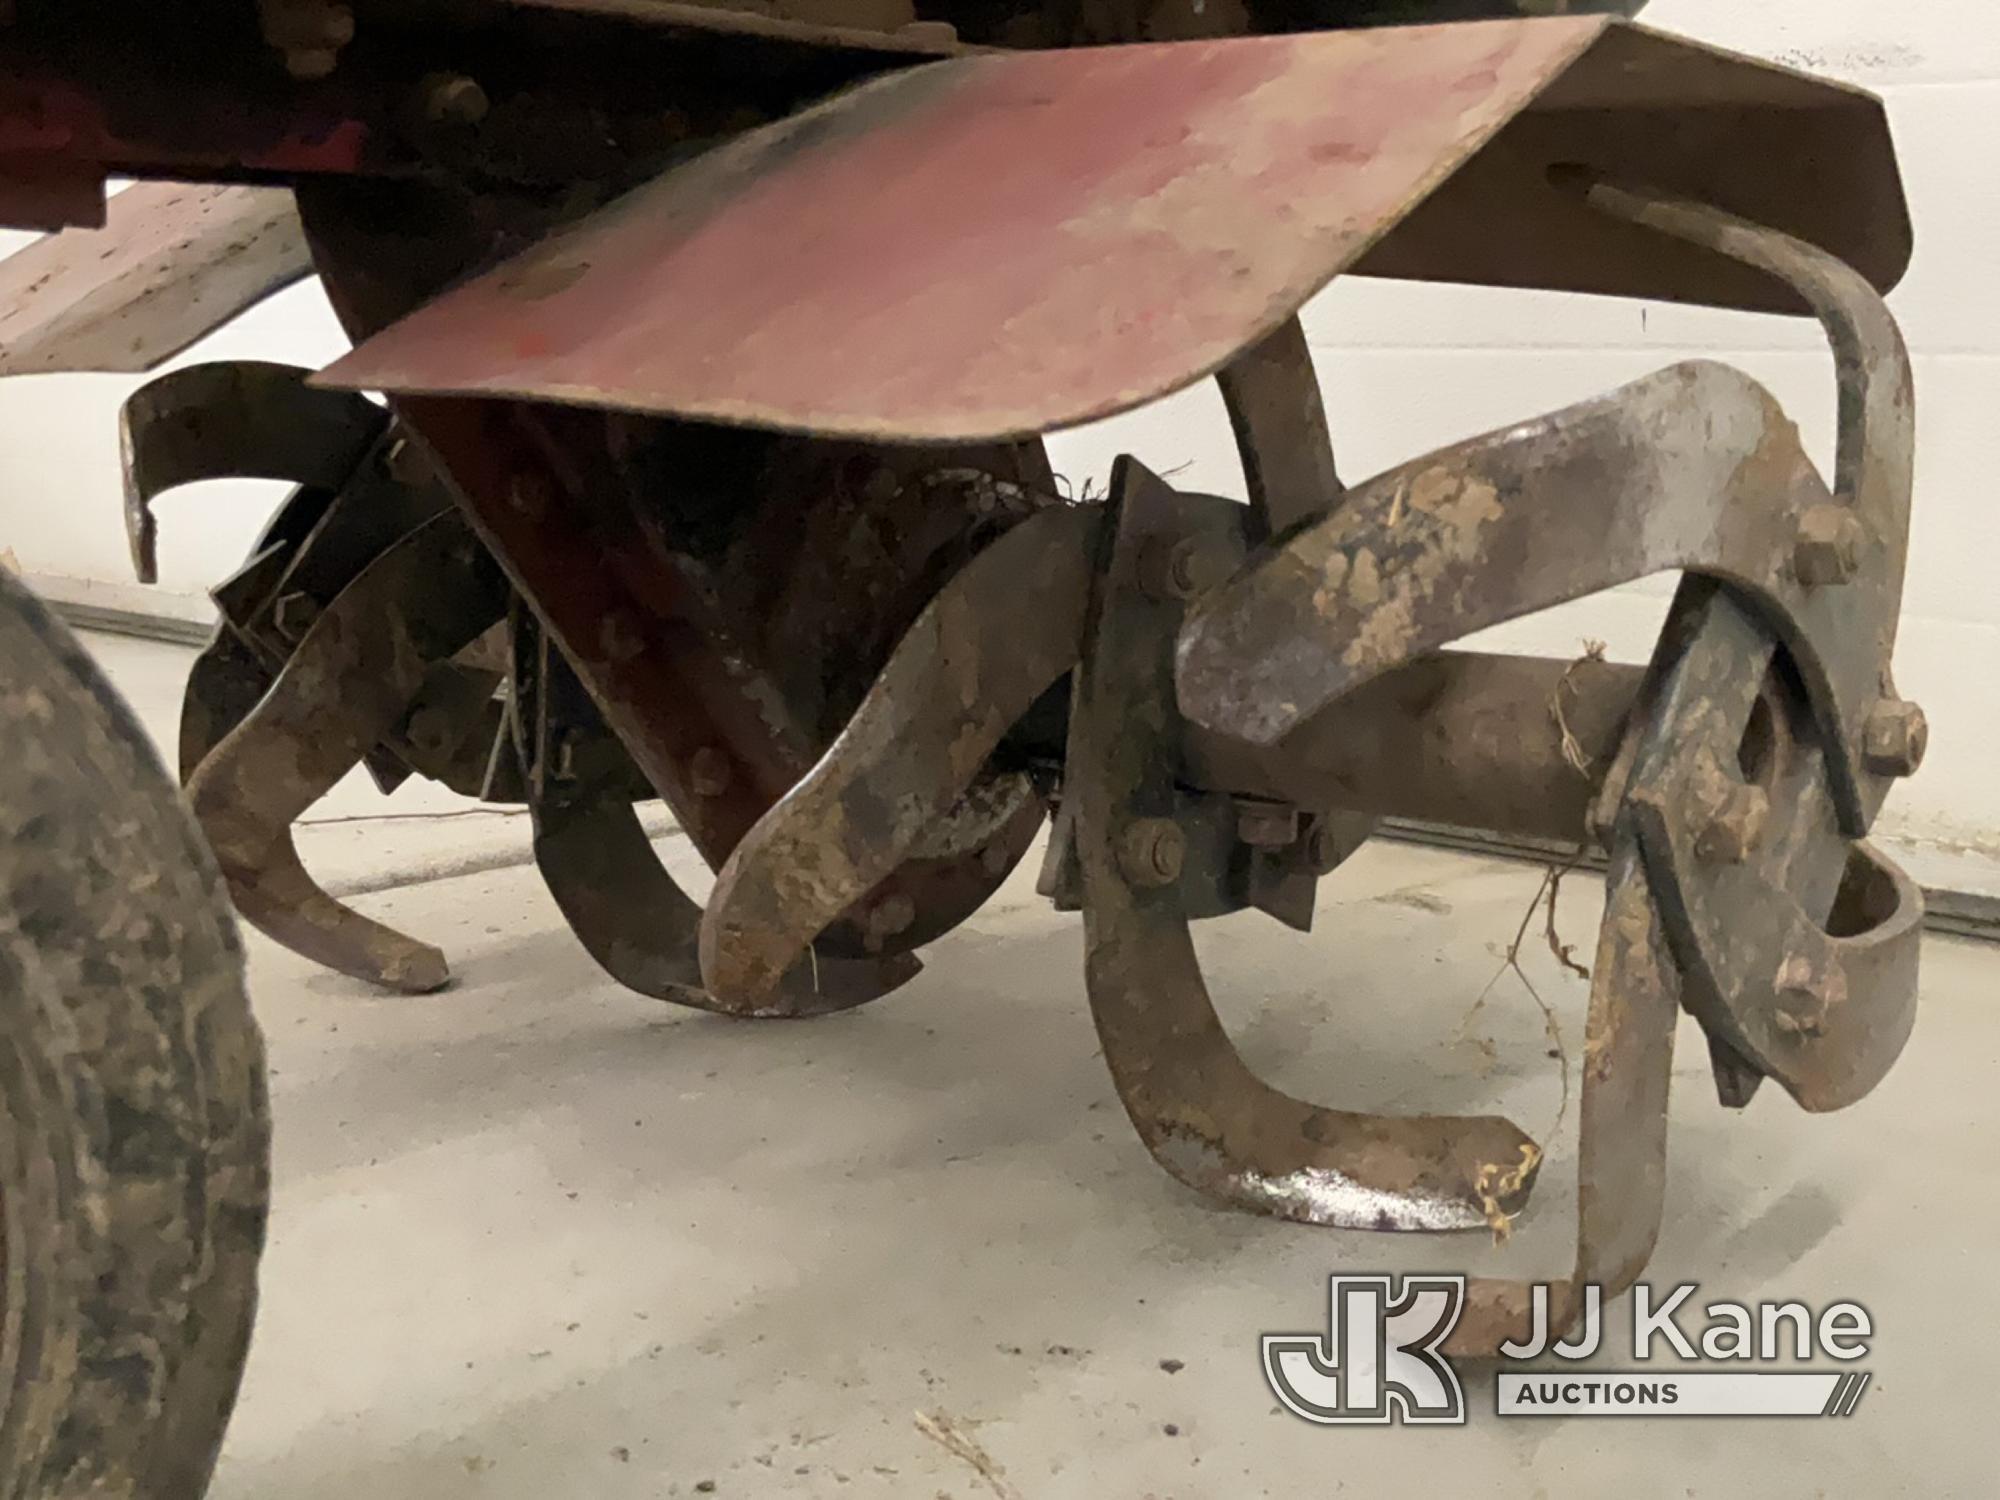 (South Beloit, IL) Maxim RotoTiller (Cranks- Does Not Start-Condition Unknown) NOTE: This unit is be